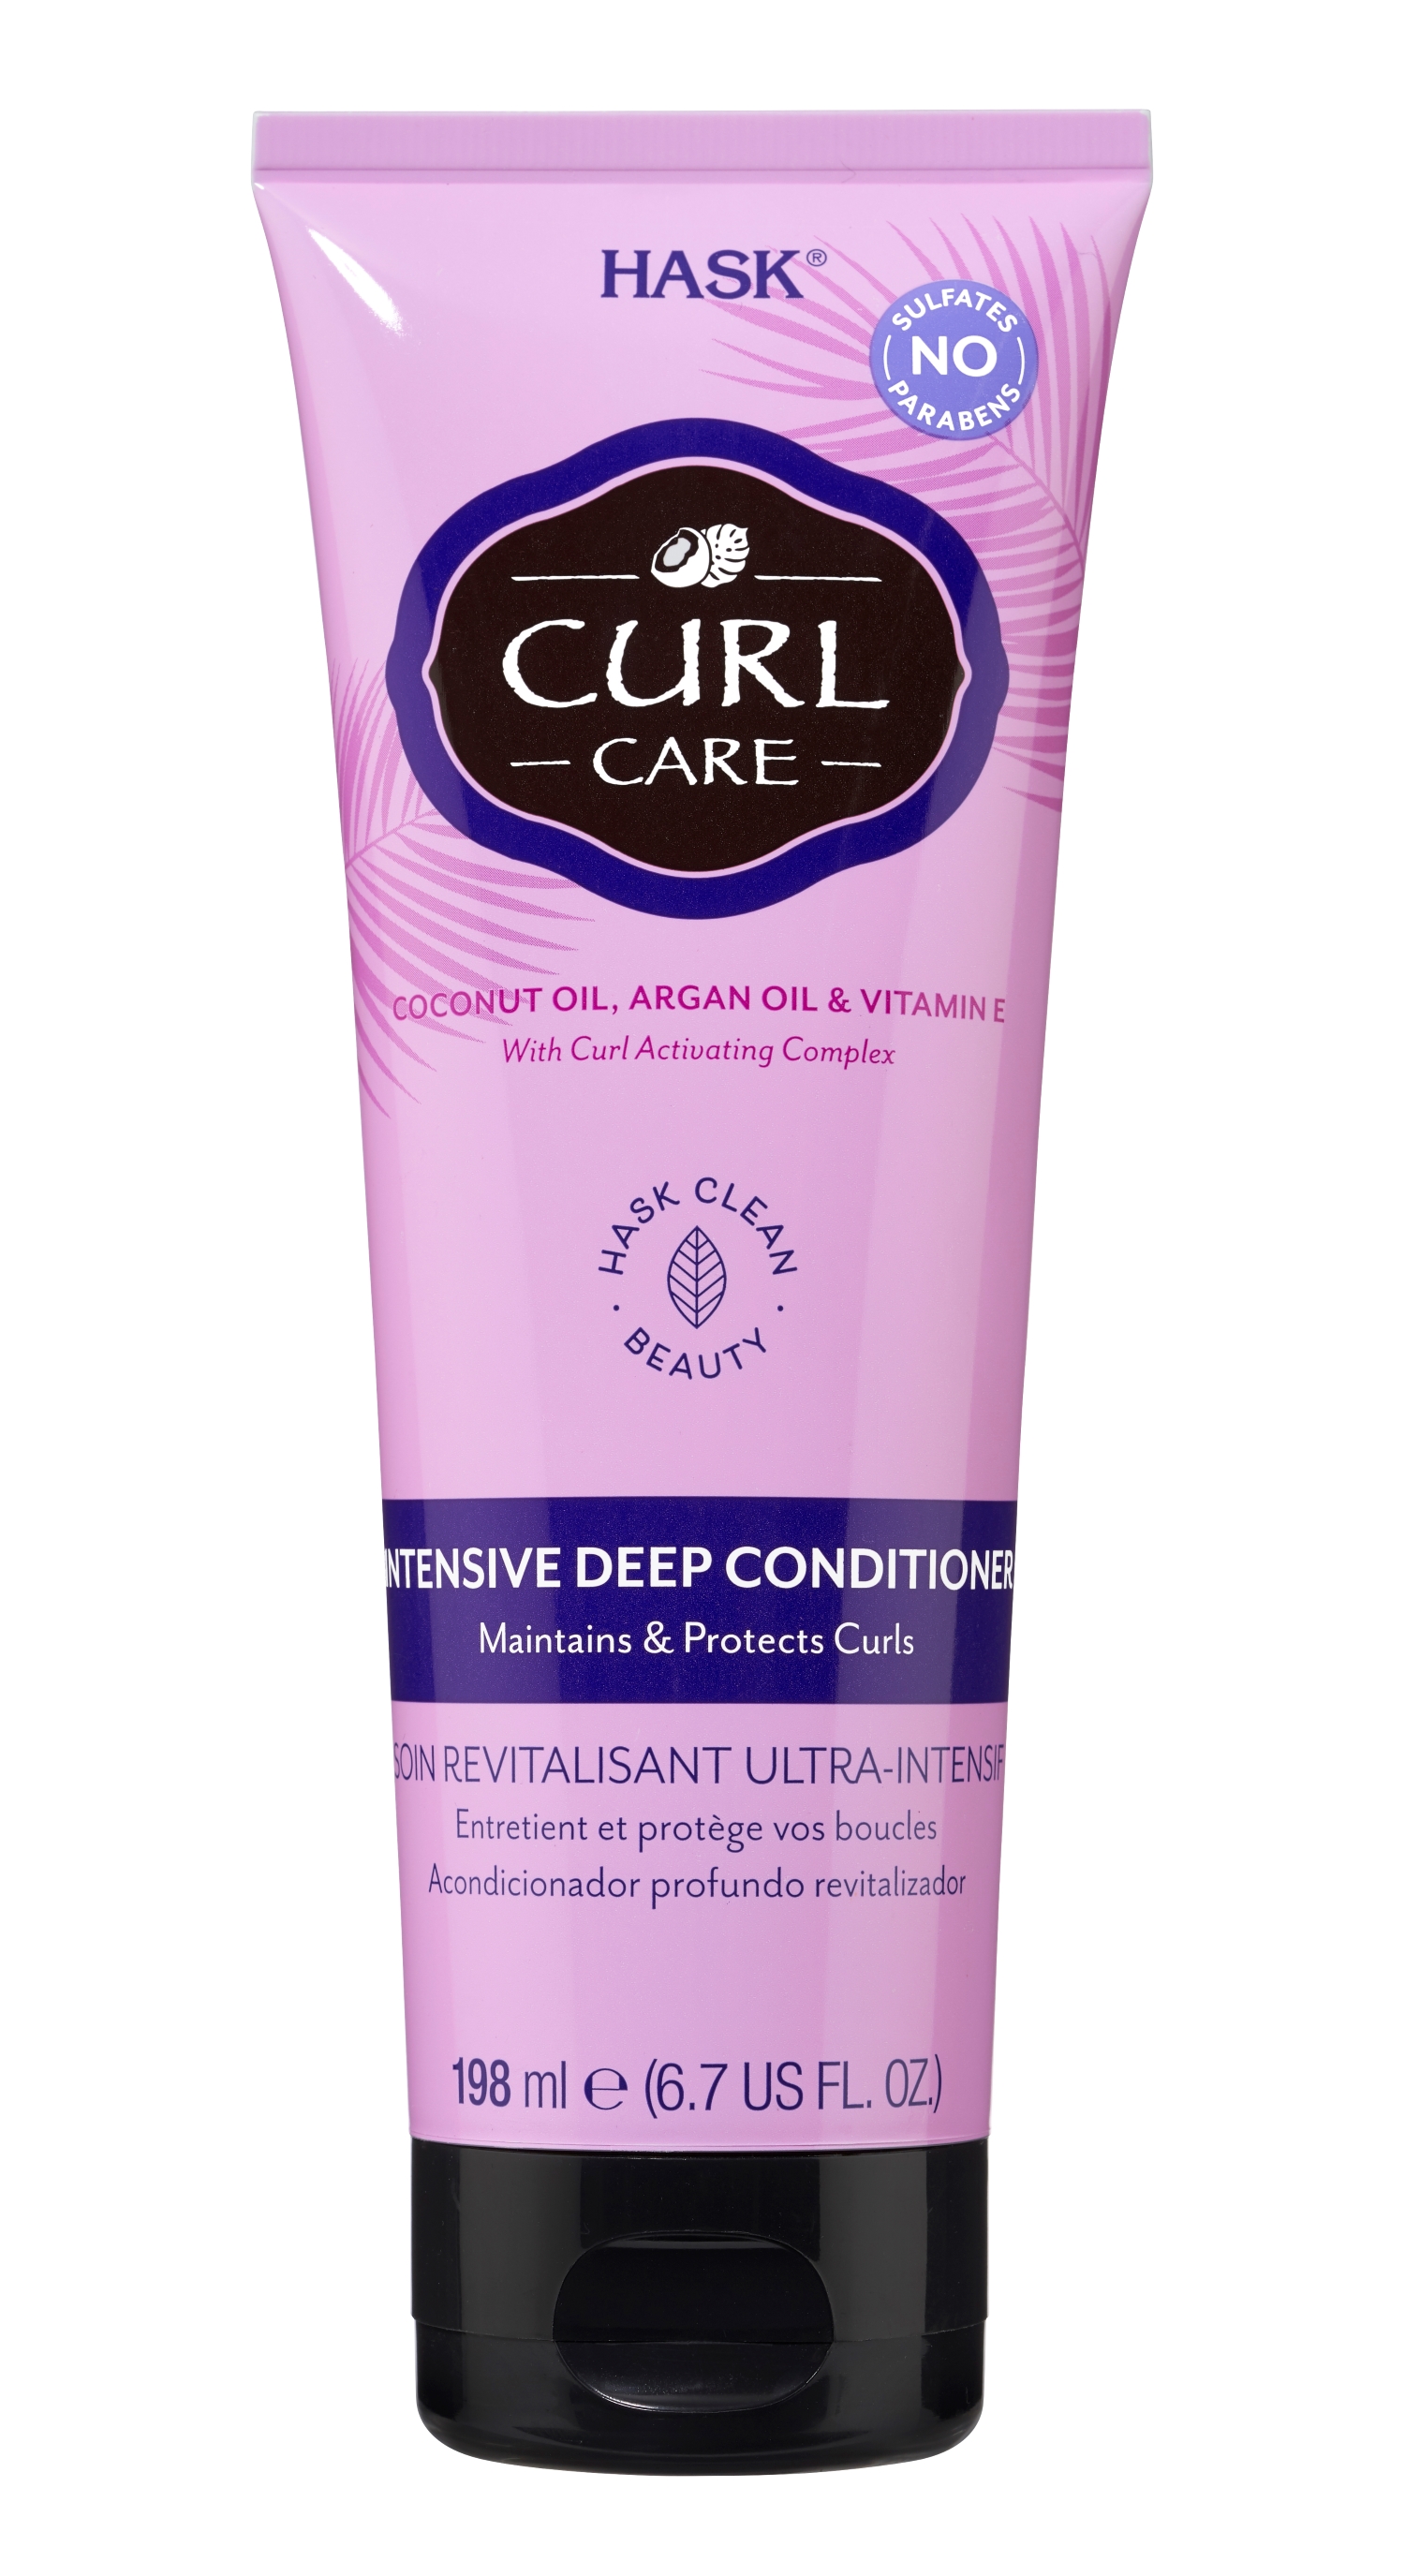 Hask Curl Care Moisturizing Shine Enhancing Deep Conditioner with Coconut oil & Vitamin E, 6.7 fl oz - image 1 of 10